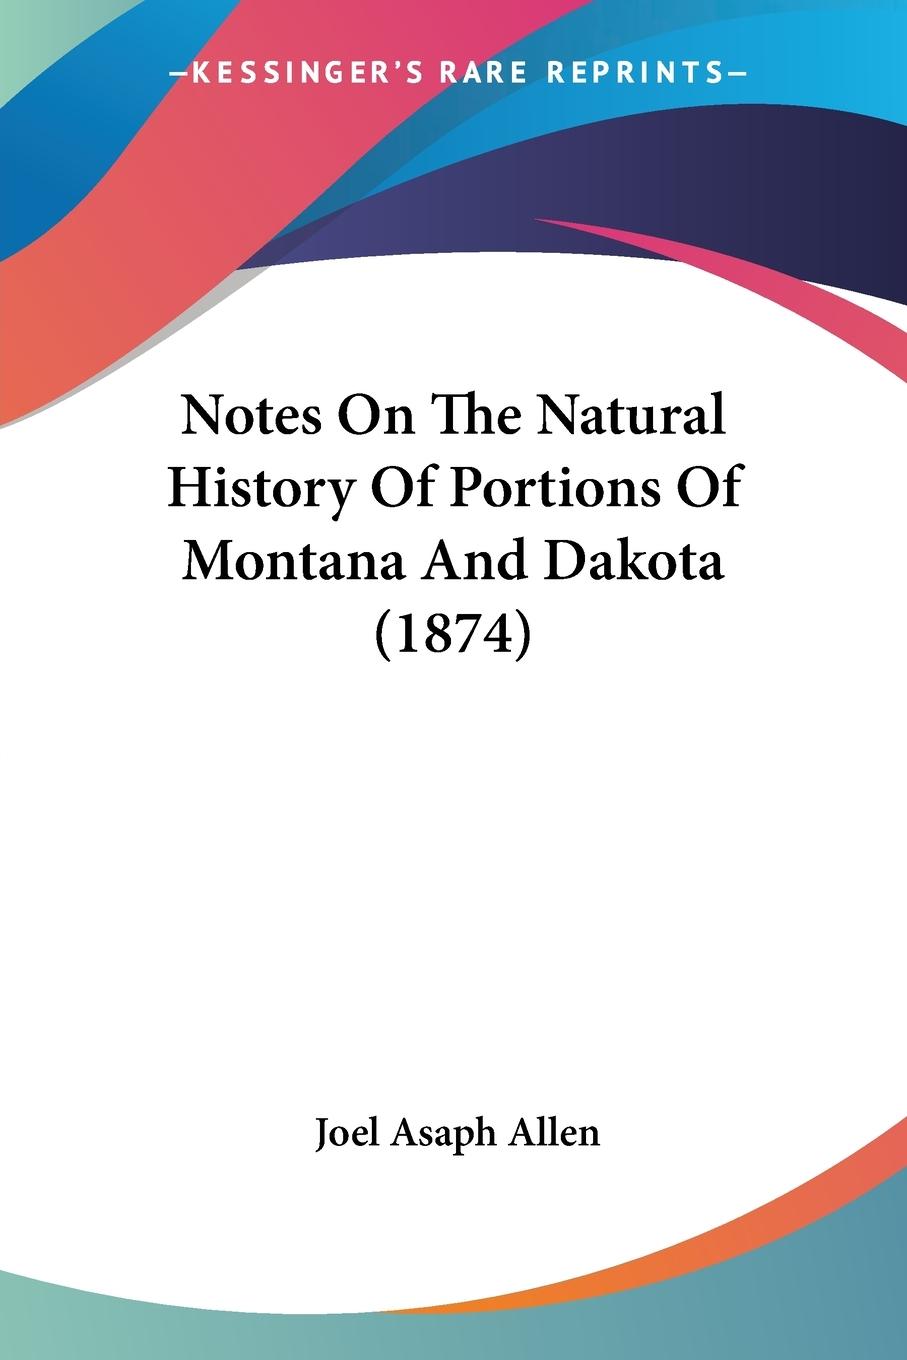 Notes On The Natural History Of Portions Of Montana And Dakota (1874) - Allen, Joel Asaph